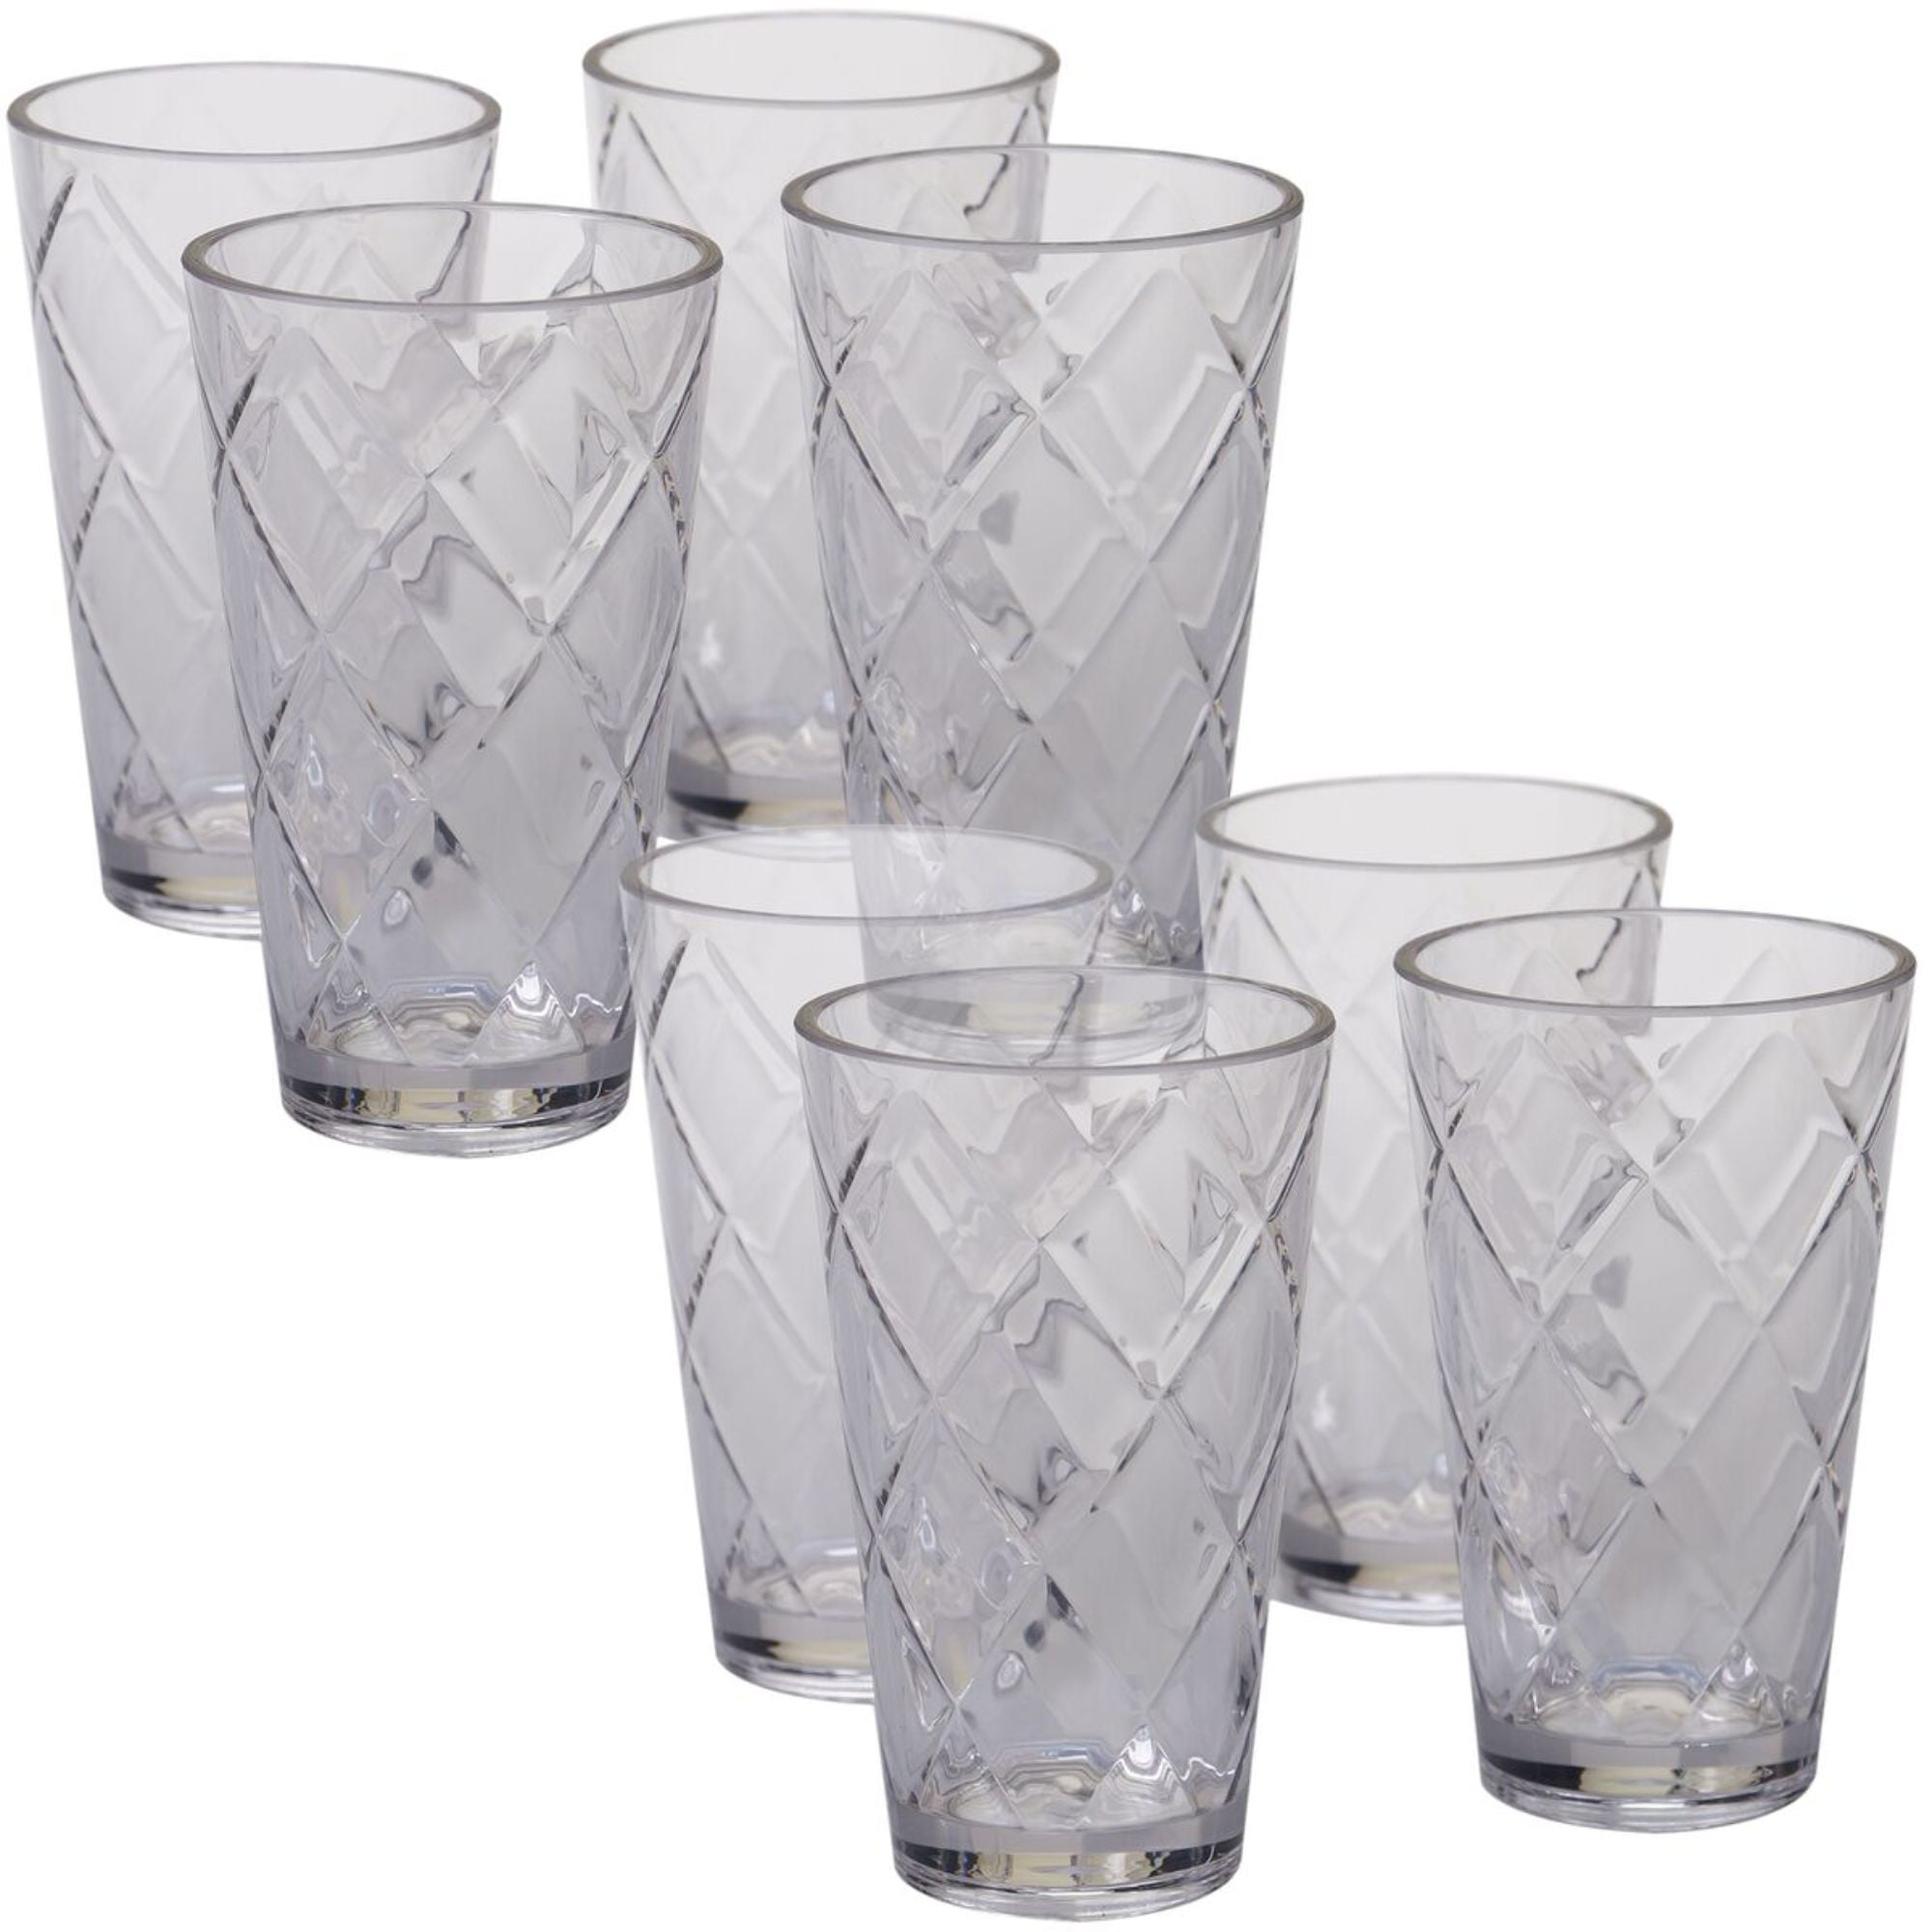 23 oz Set of 6 Acrylic Plastic Iced Tea Cup Glass Tumbler in 3 Assorted Colors 